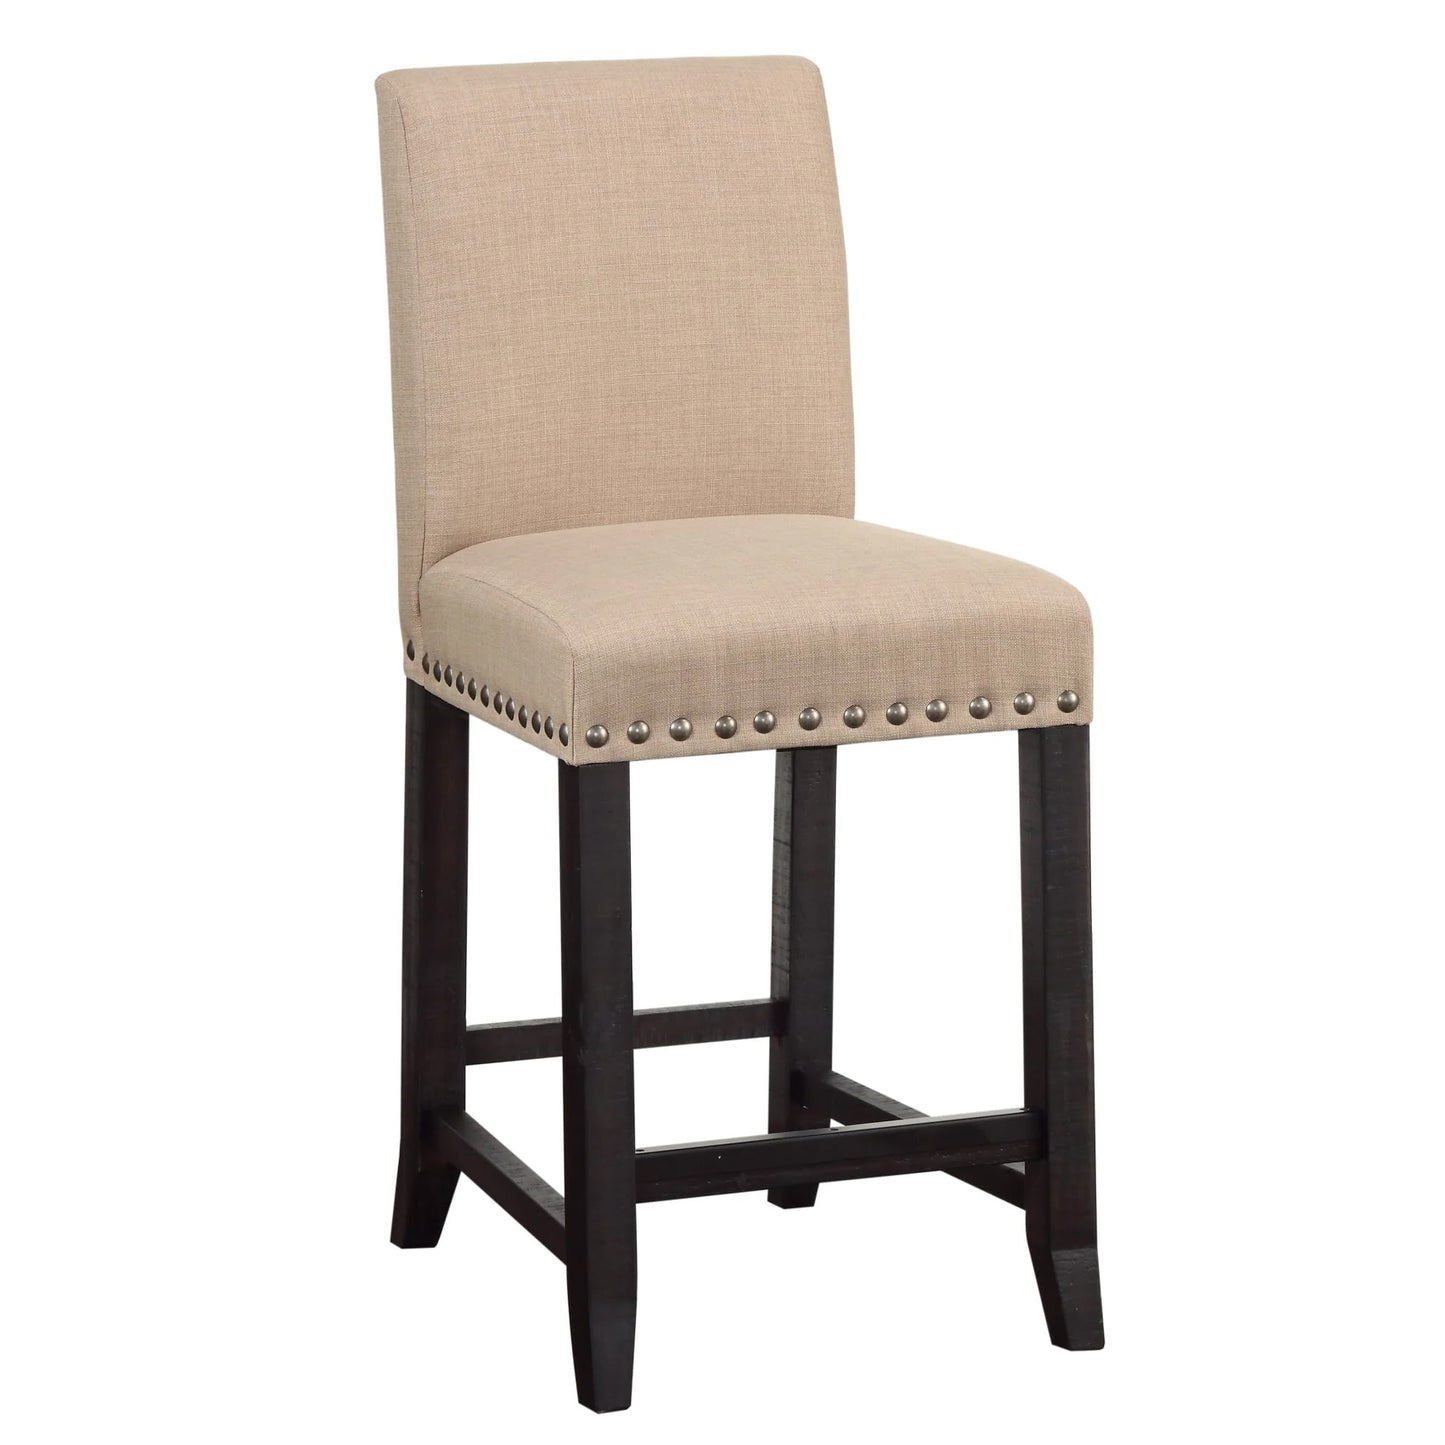 Fabric Upholstered Wooden Counter Height Stool with Nail head Trim, Set of 2,  Brown - 7YC970F